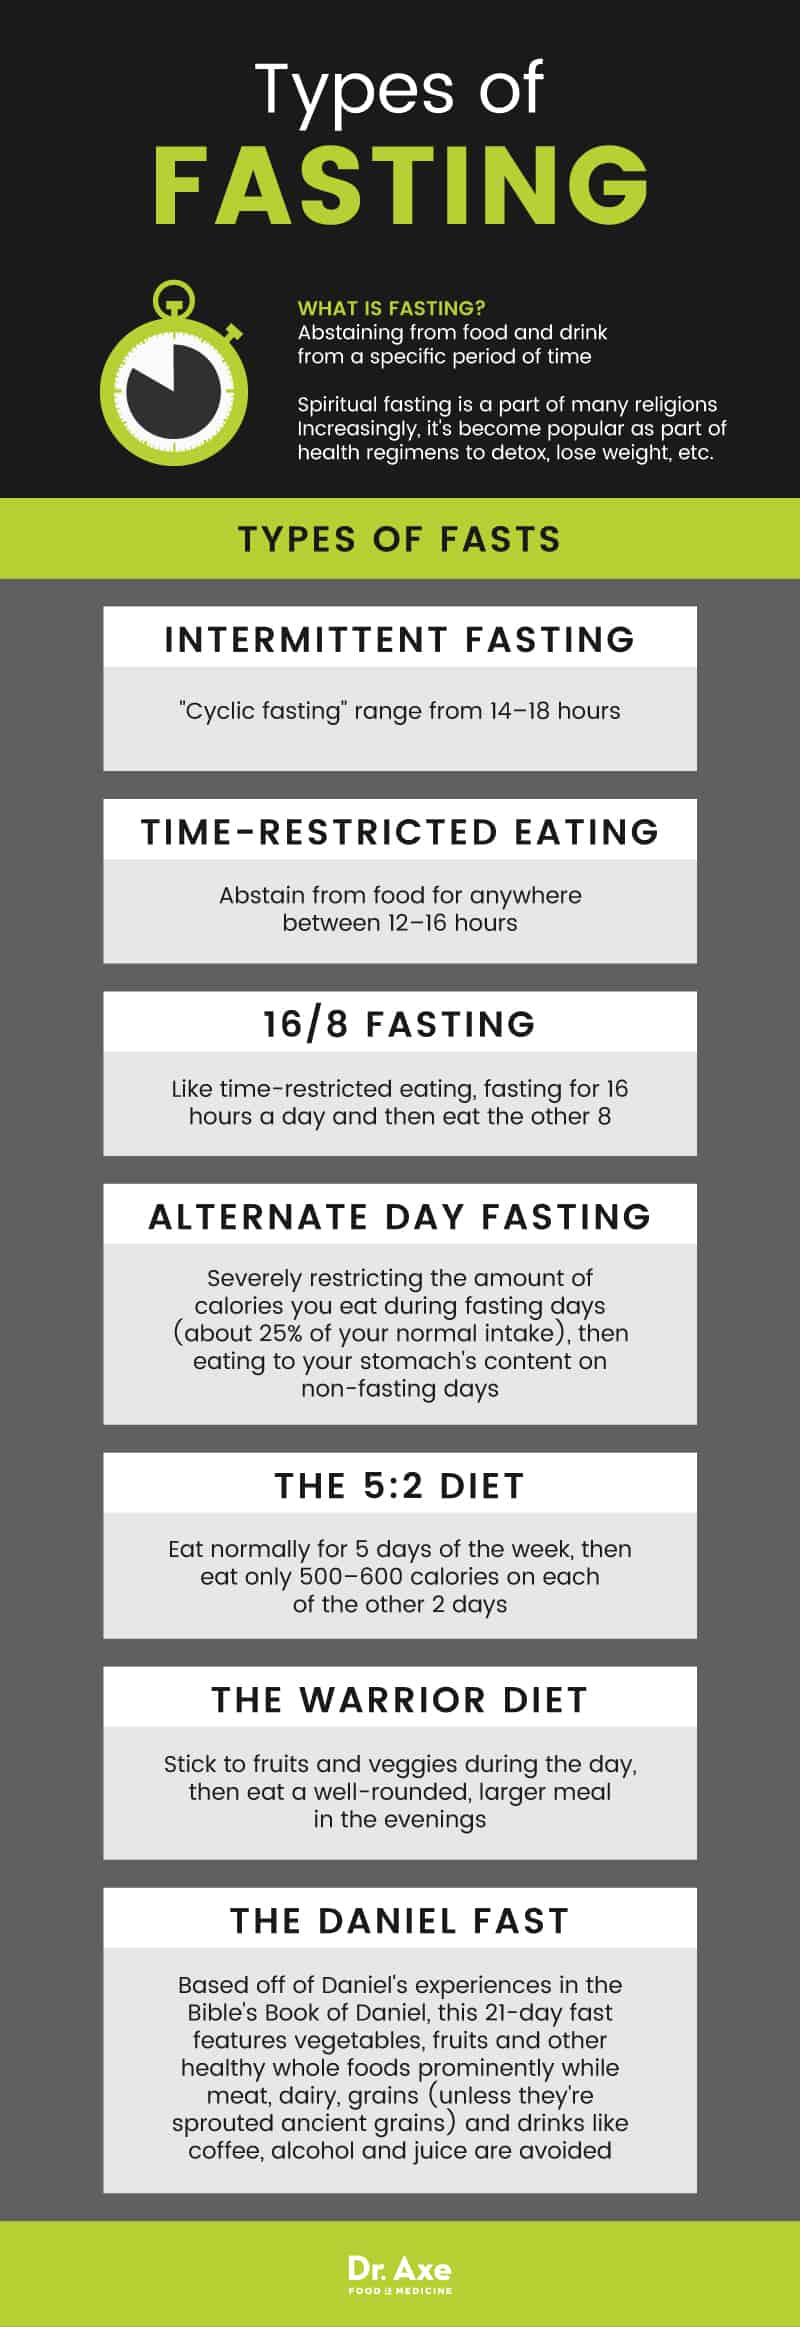 Types of fasting - Dr. Axe